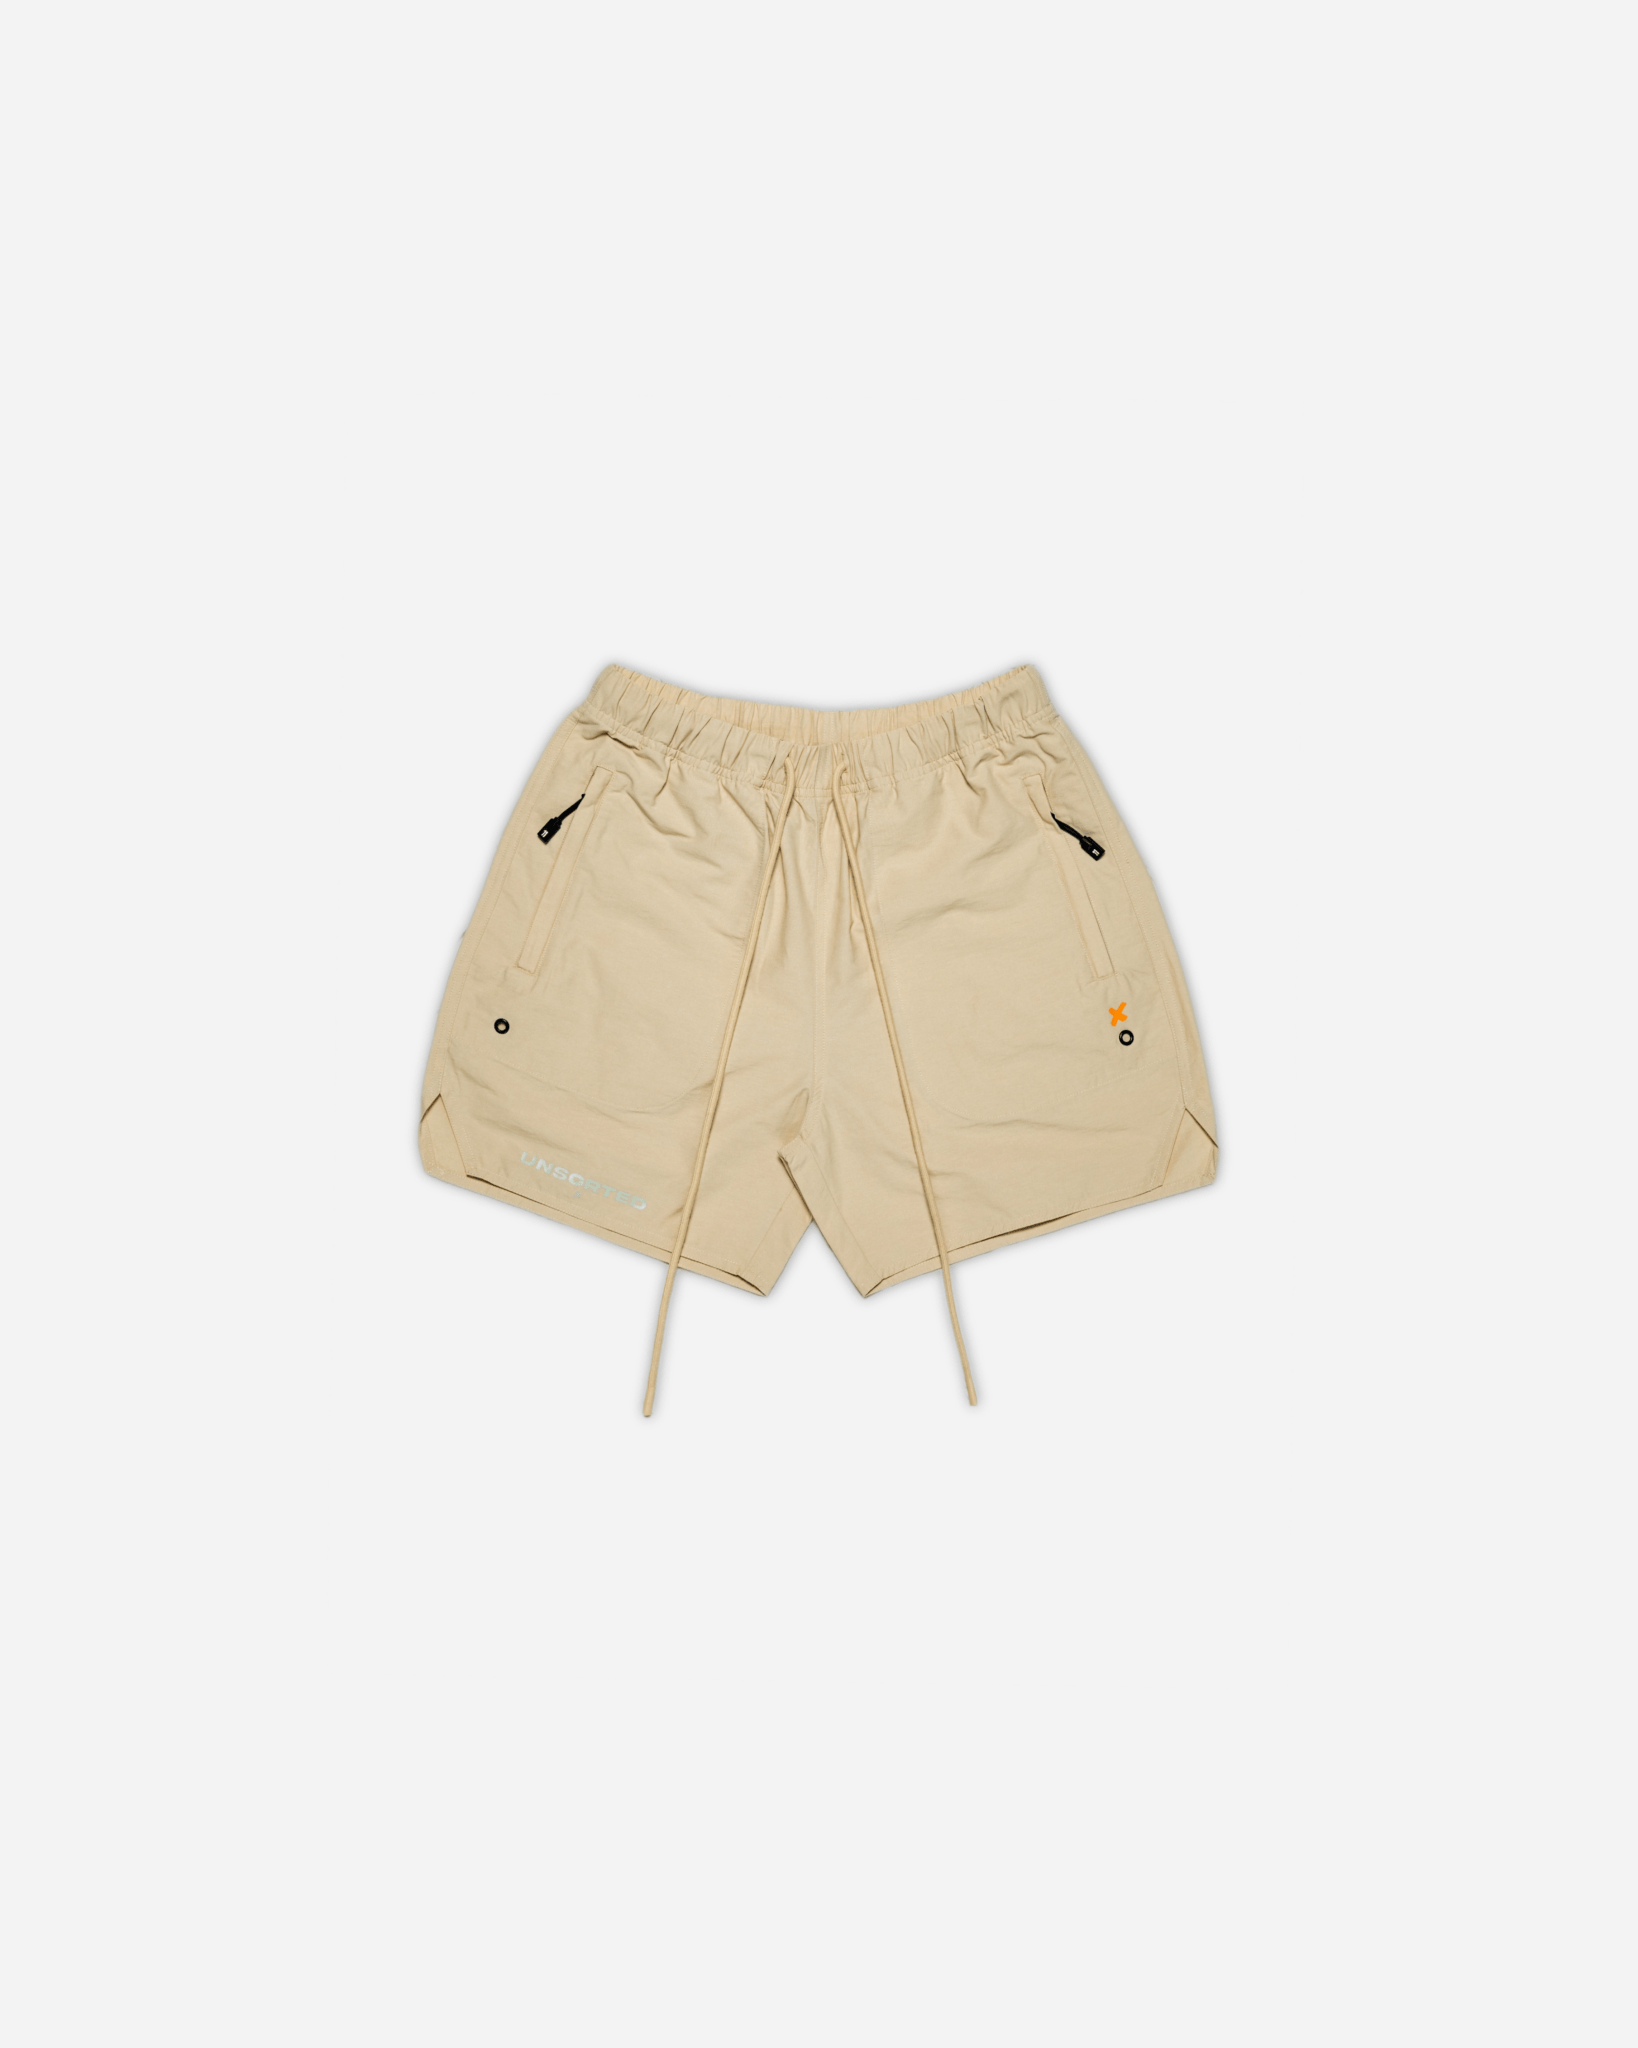 LEISURE SHORTS - Unsorted x